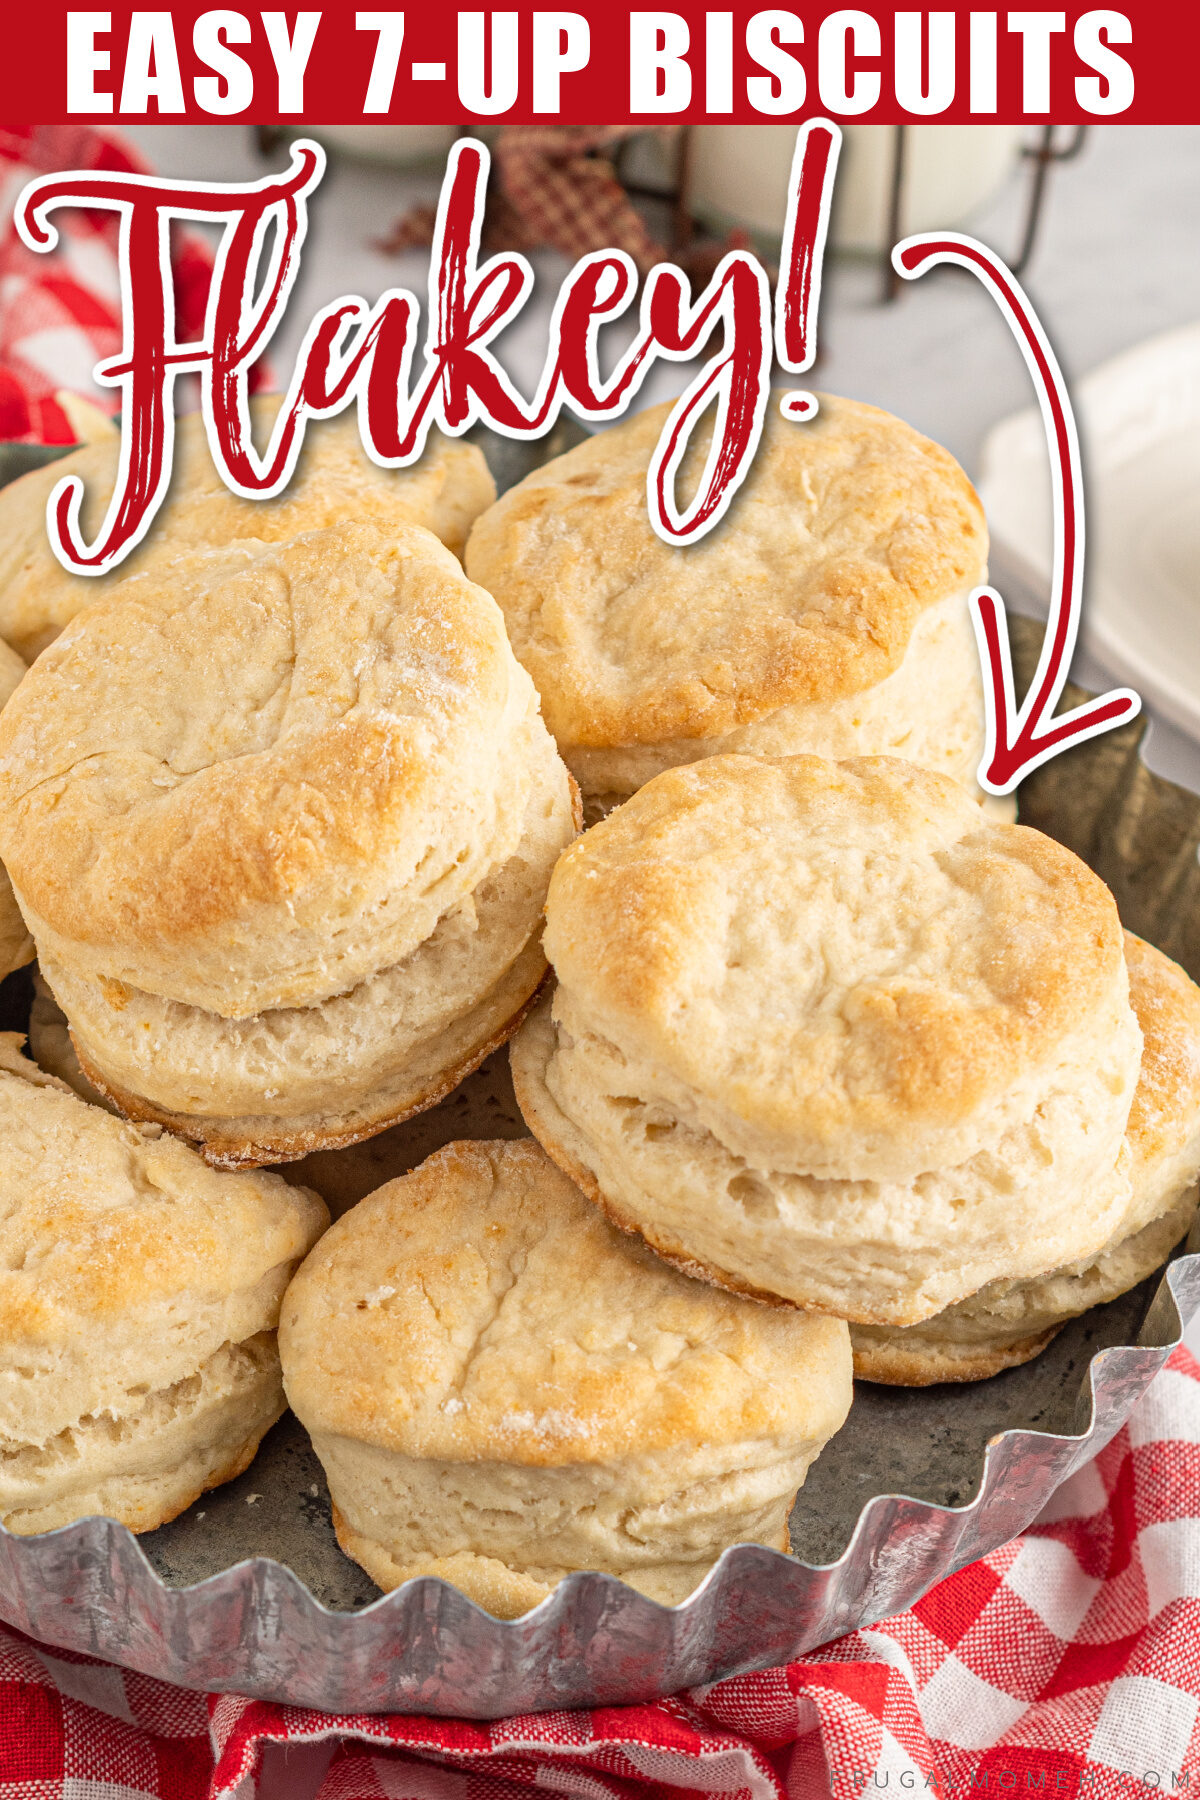 This easy 7-Up biscuits recipe makes fluffy, golden biscuits made with just a few simple ingredients and are ready in about 30 minutes!